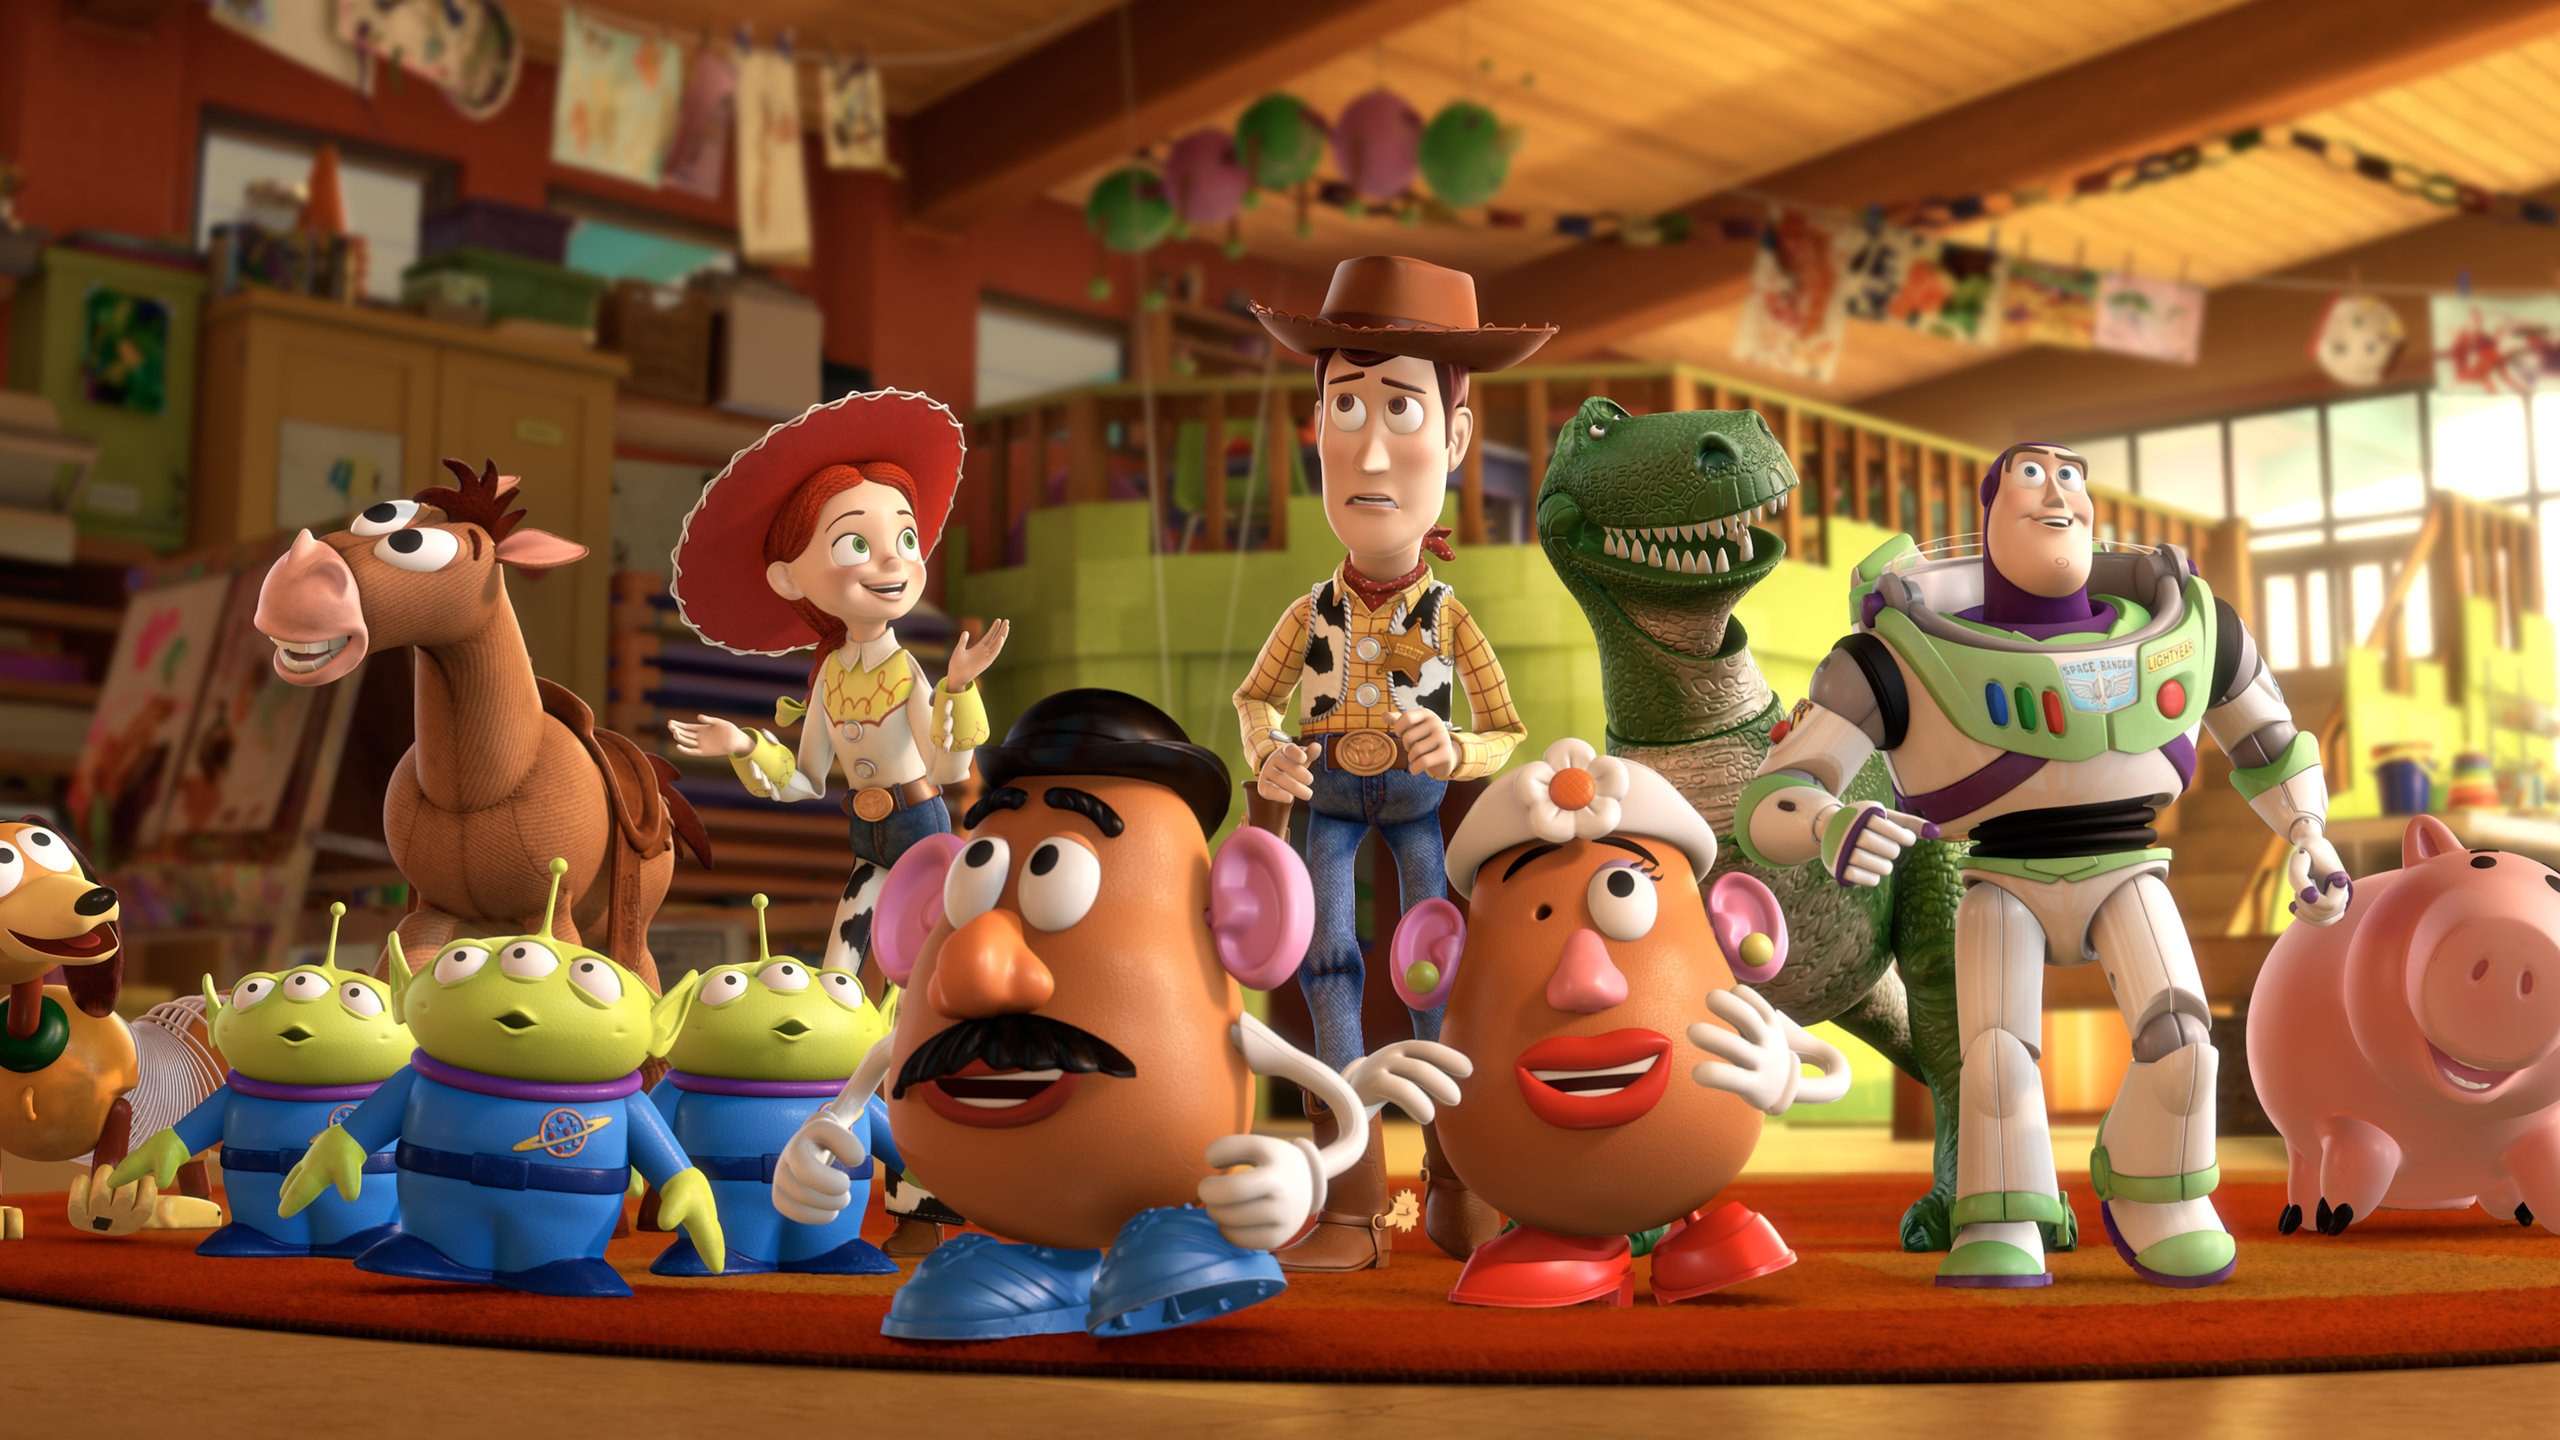 Toy Story 3 Cast for 2560x1440 HDTV resolution